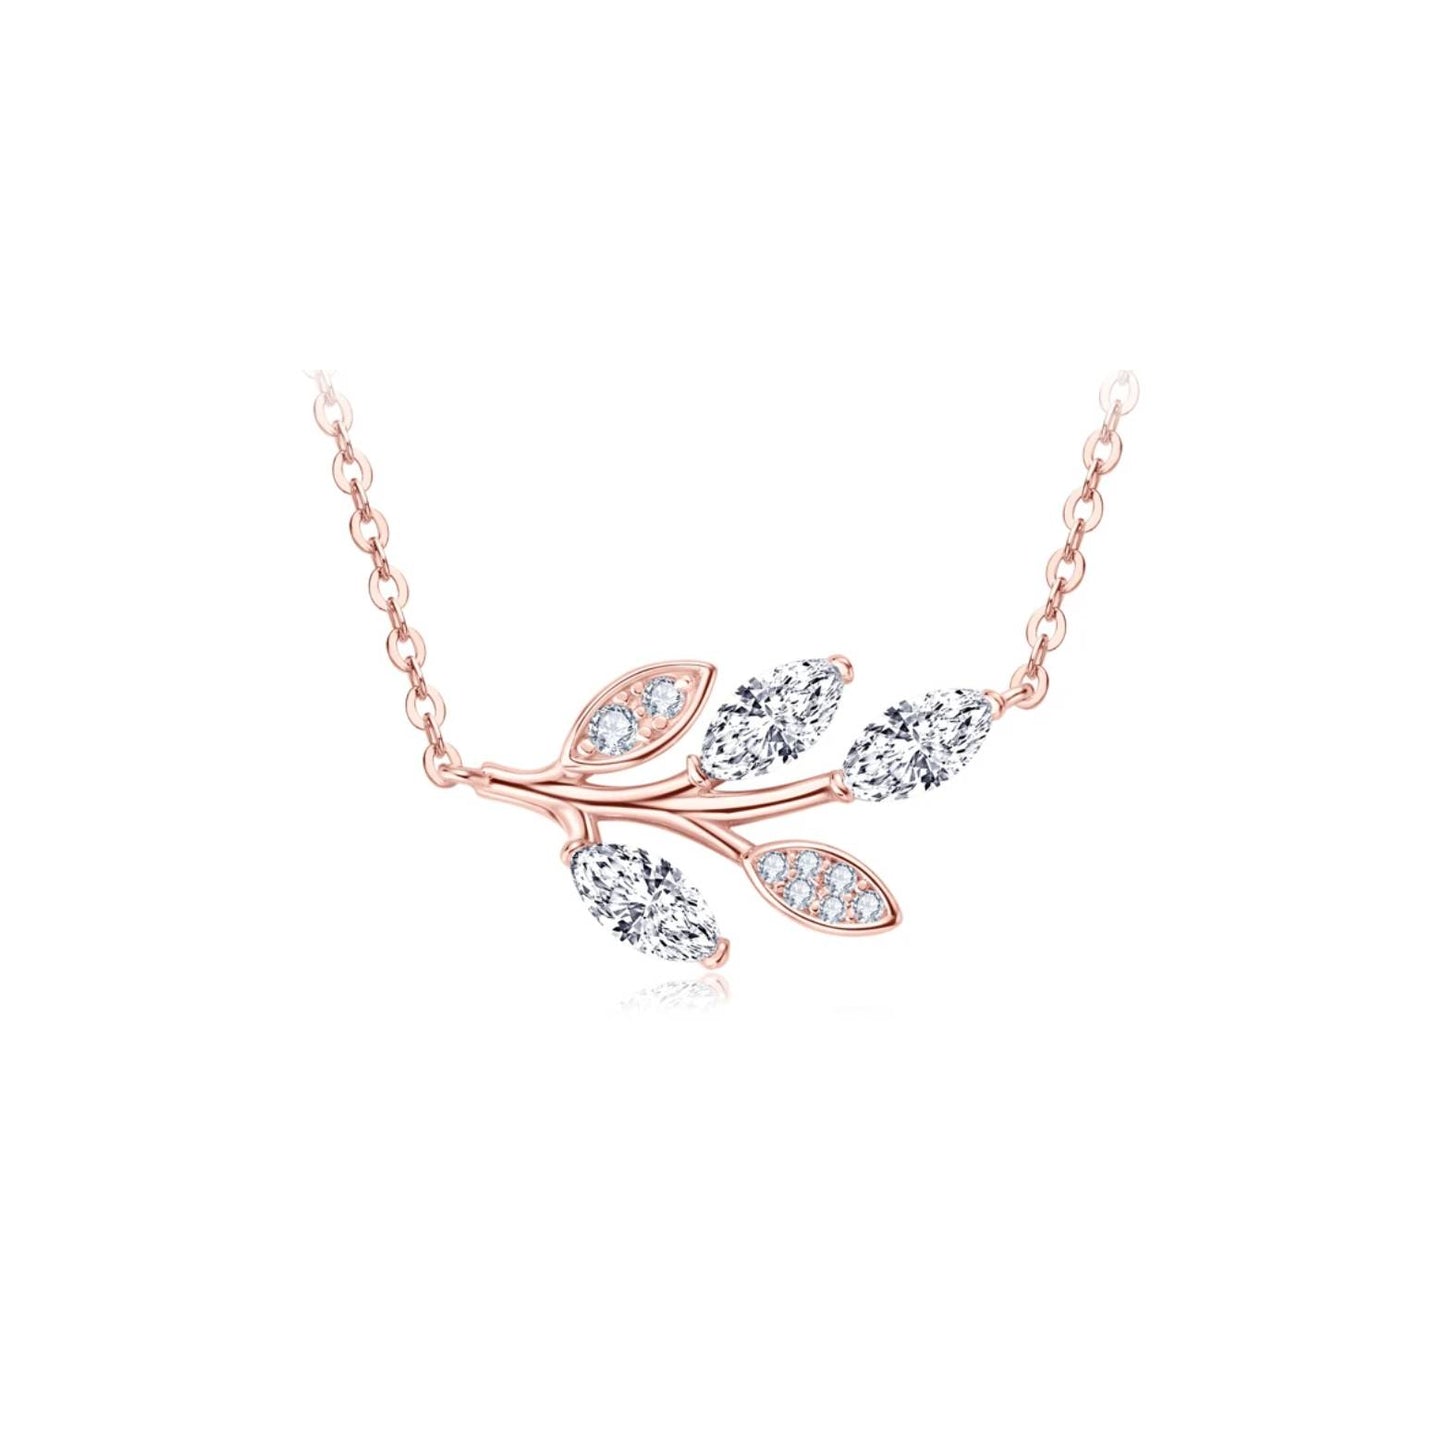 Moissanite Leaf Pendant Necklace - Marquise Cut 925 Sterling Silver